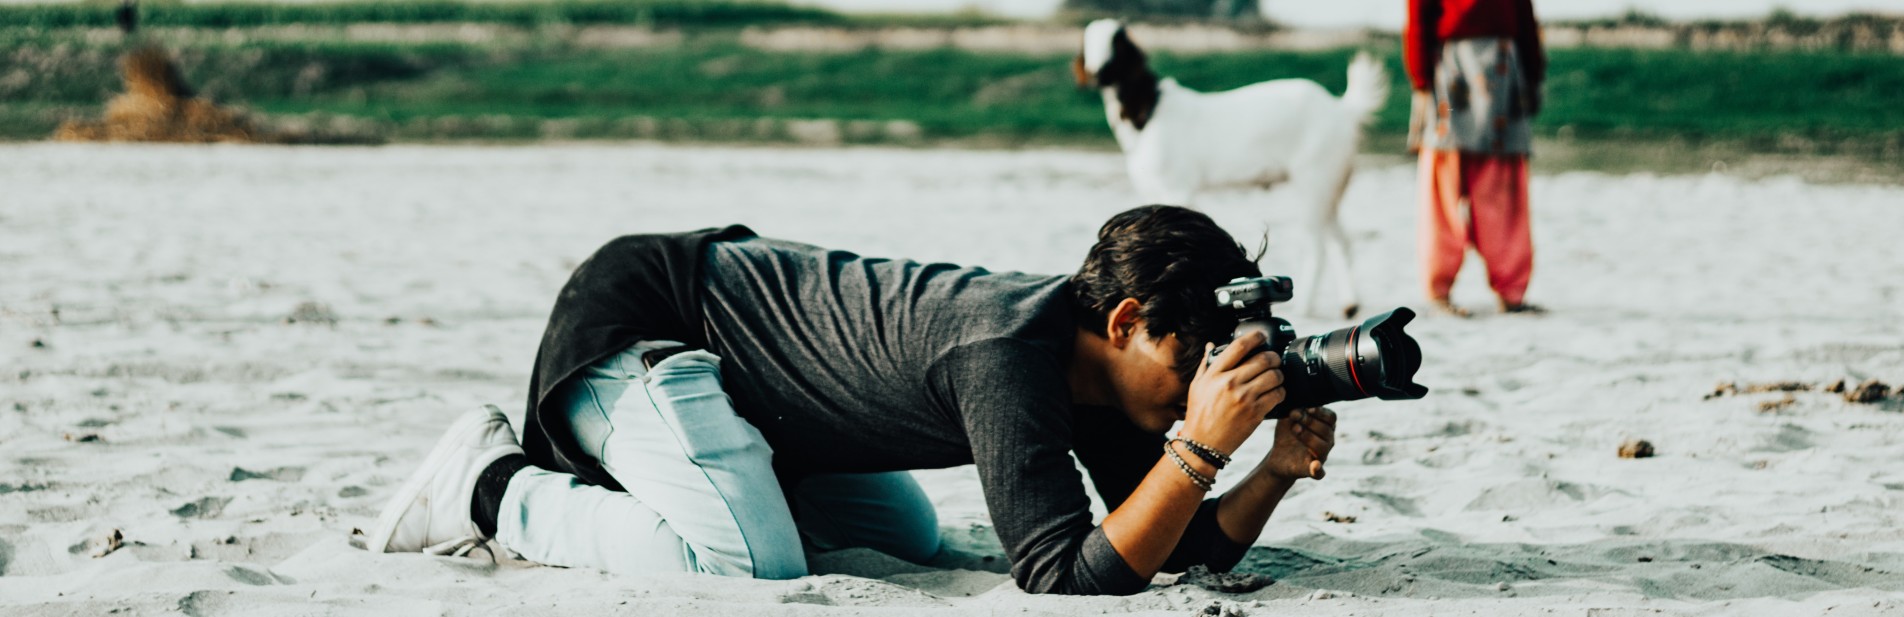 Photographer kneeling on a beach while taking a photo